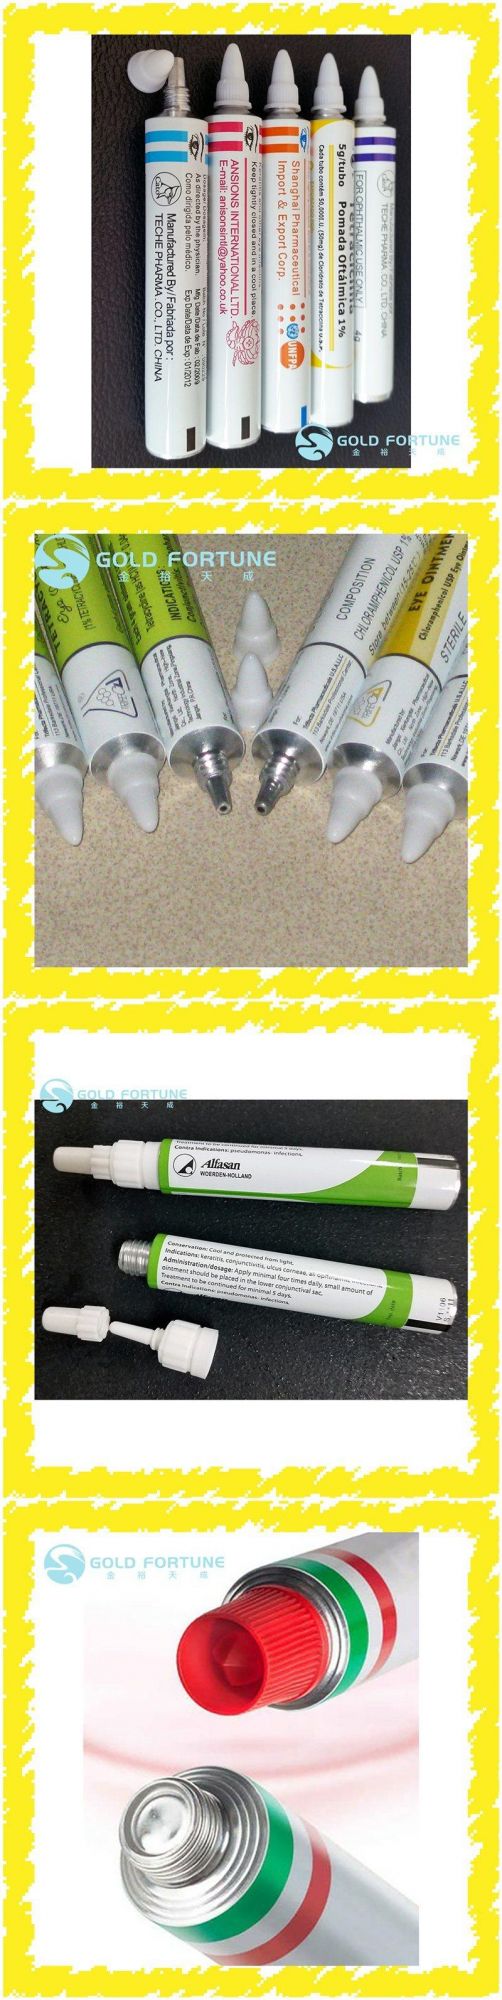 Pharmaceutical Tube Japanese Standard Toothpaste Aluminum Collapsible Tube Package Made in China/ 19mm 11g with Screw Cap